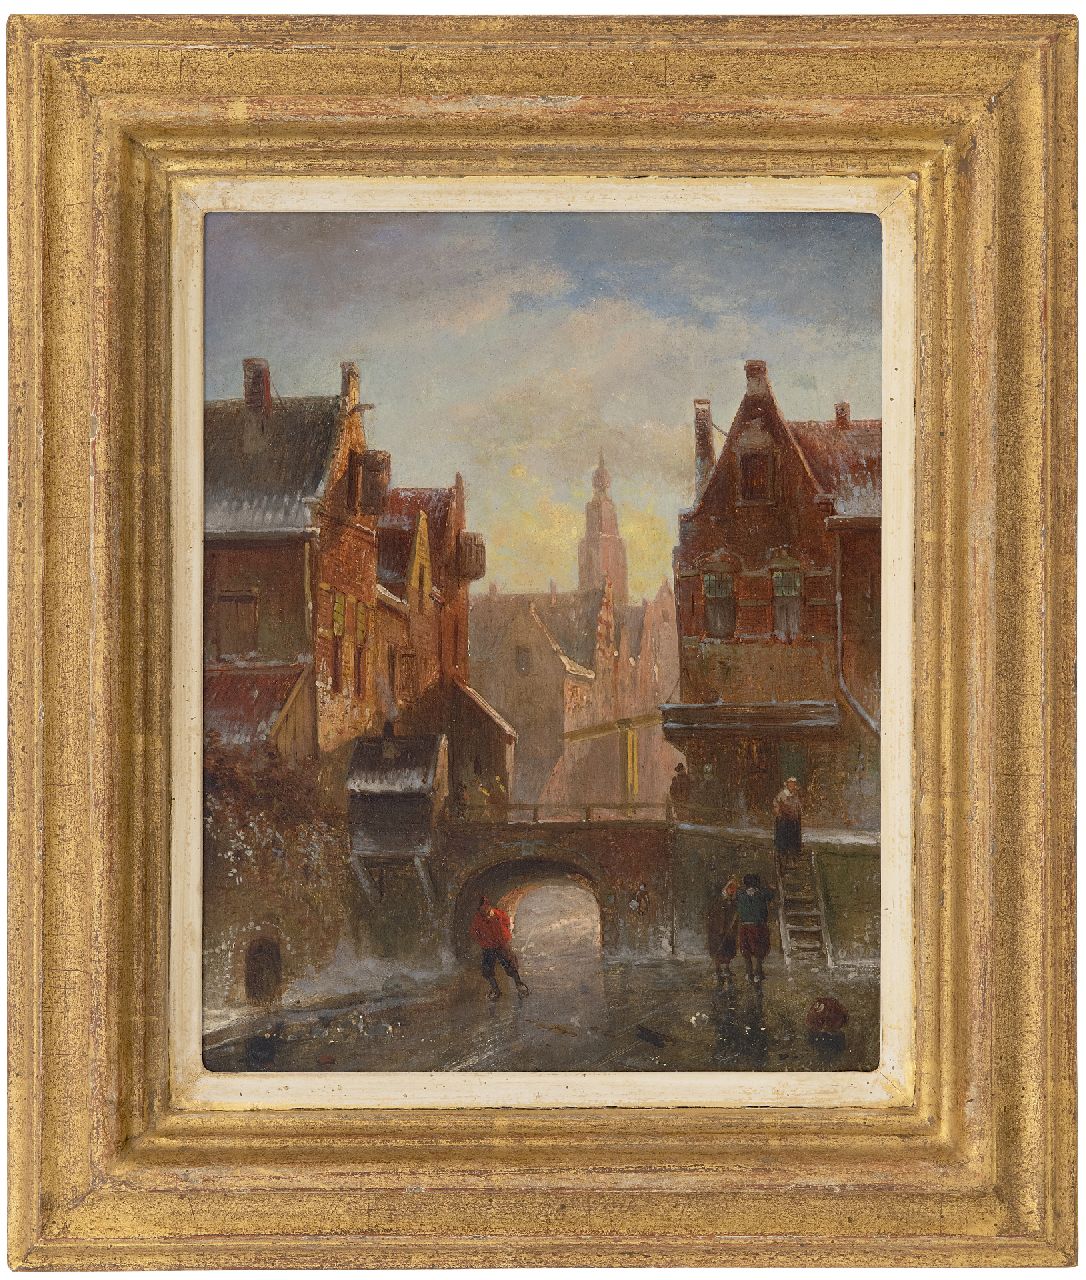 Leickert C.H.J.  | 'Charles' Henri Joseph Leickert | Paintings offered for sale | Winter townscape with figures on the ice, oil on panel 25.1 x 19.8 cm, signed l.r.